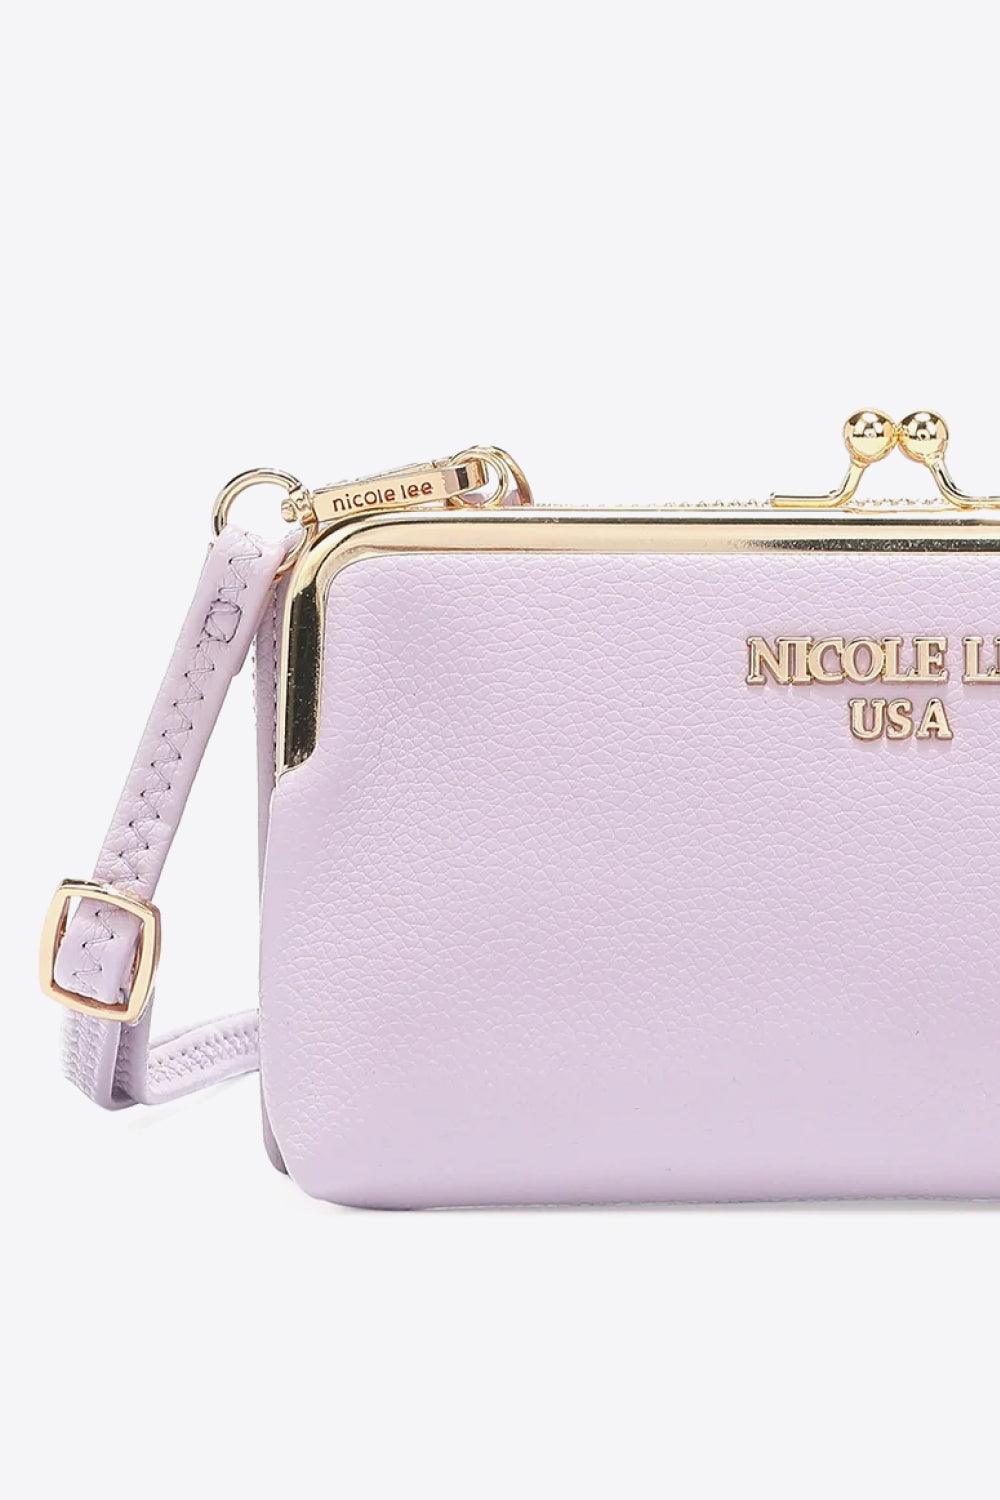 Nicole Lee USA Night Out Crossbody Wallet Purse - Glamorous Boutique USA L.L.C.